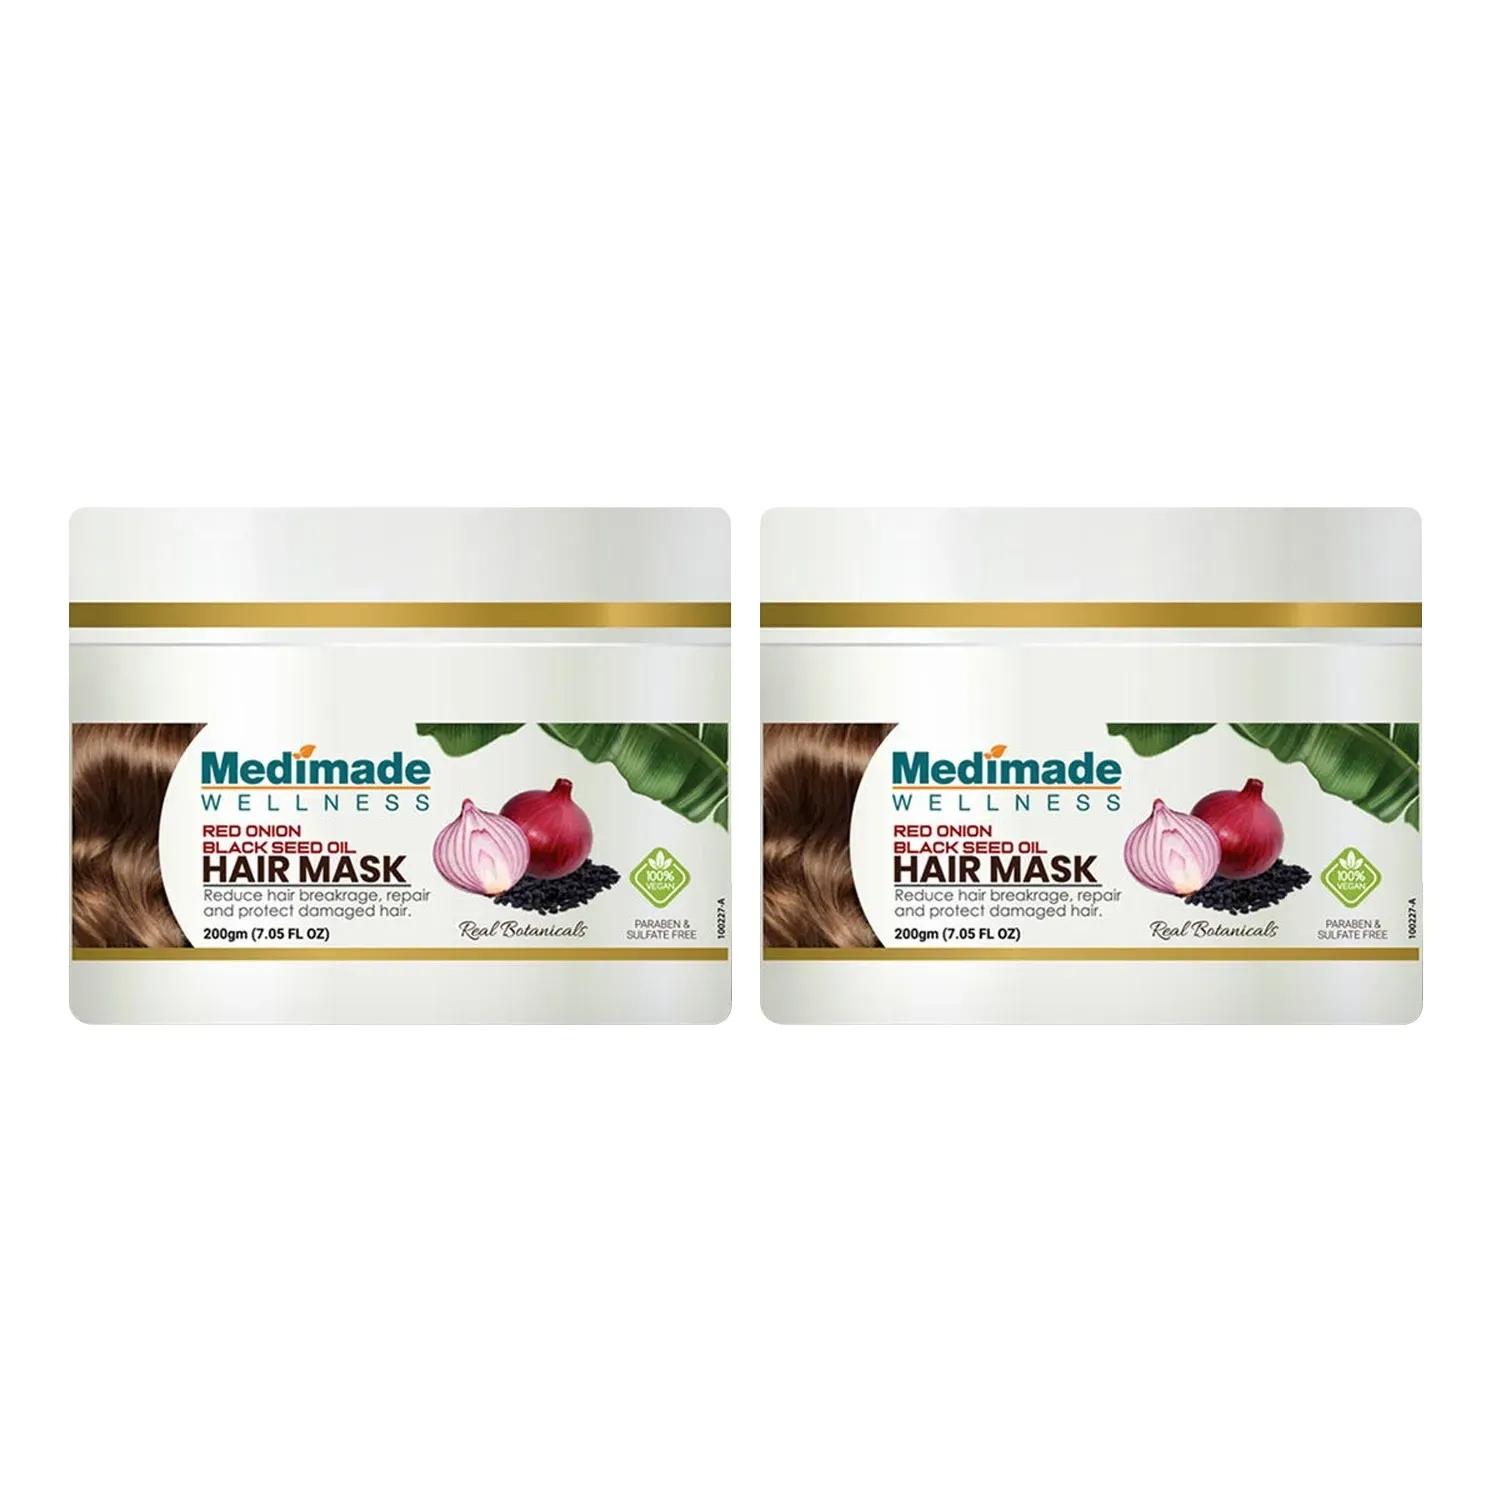 medimade red onion & black seed oil hair mask (2pcs)